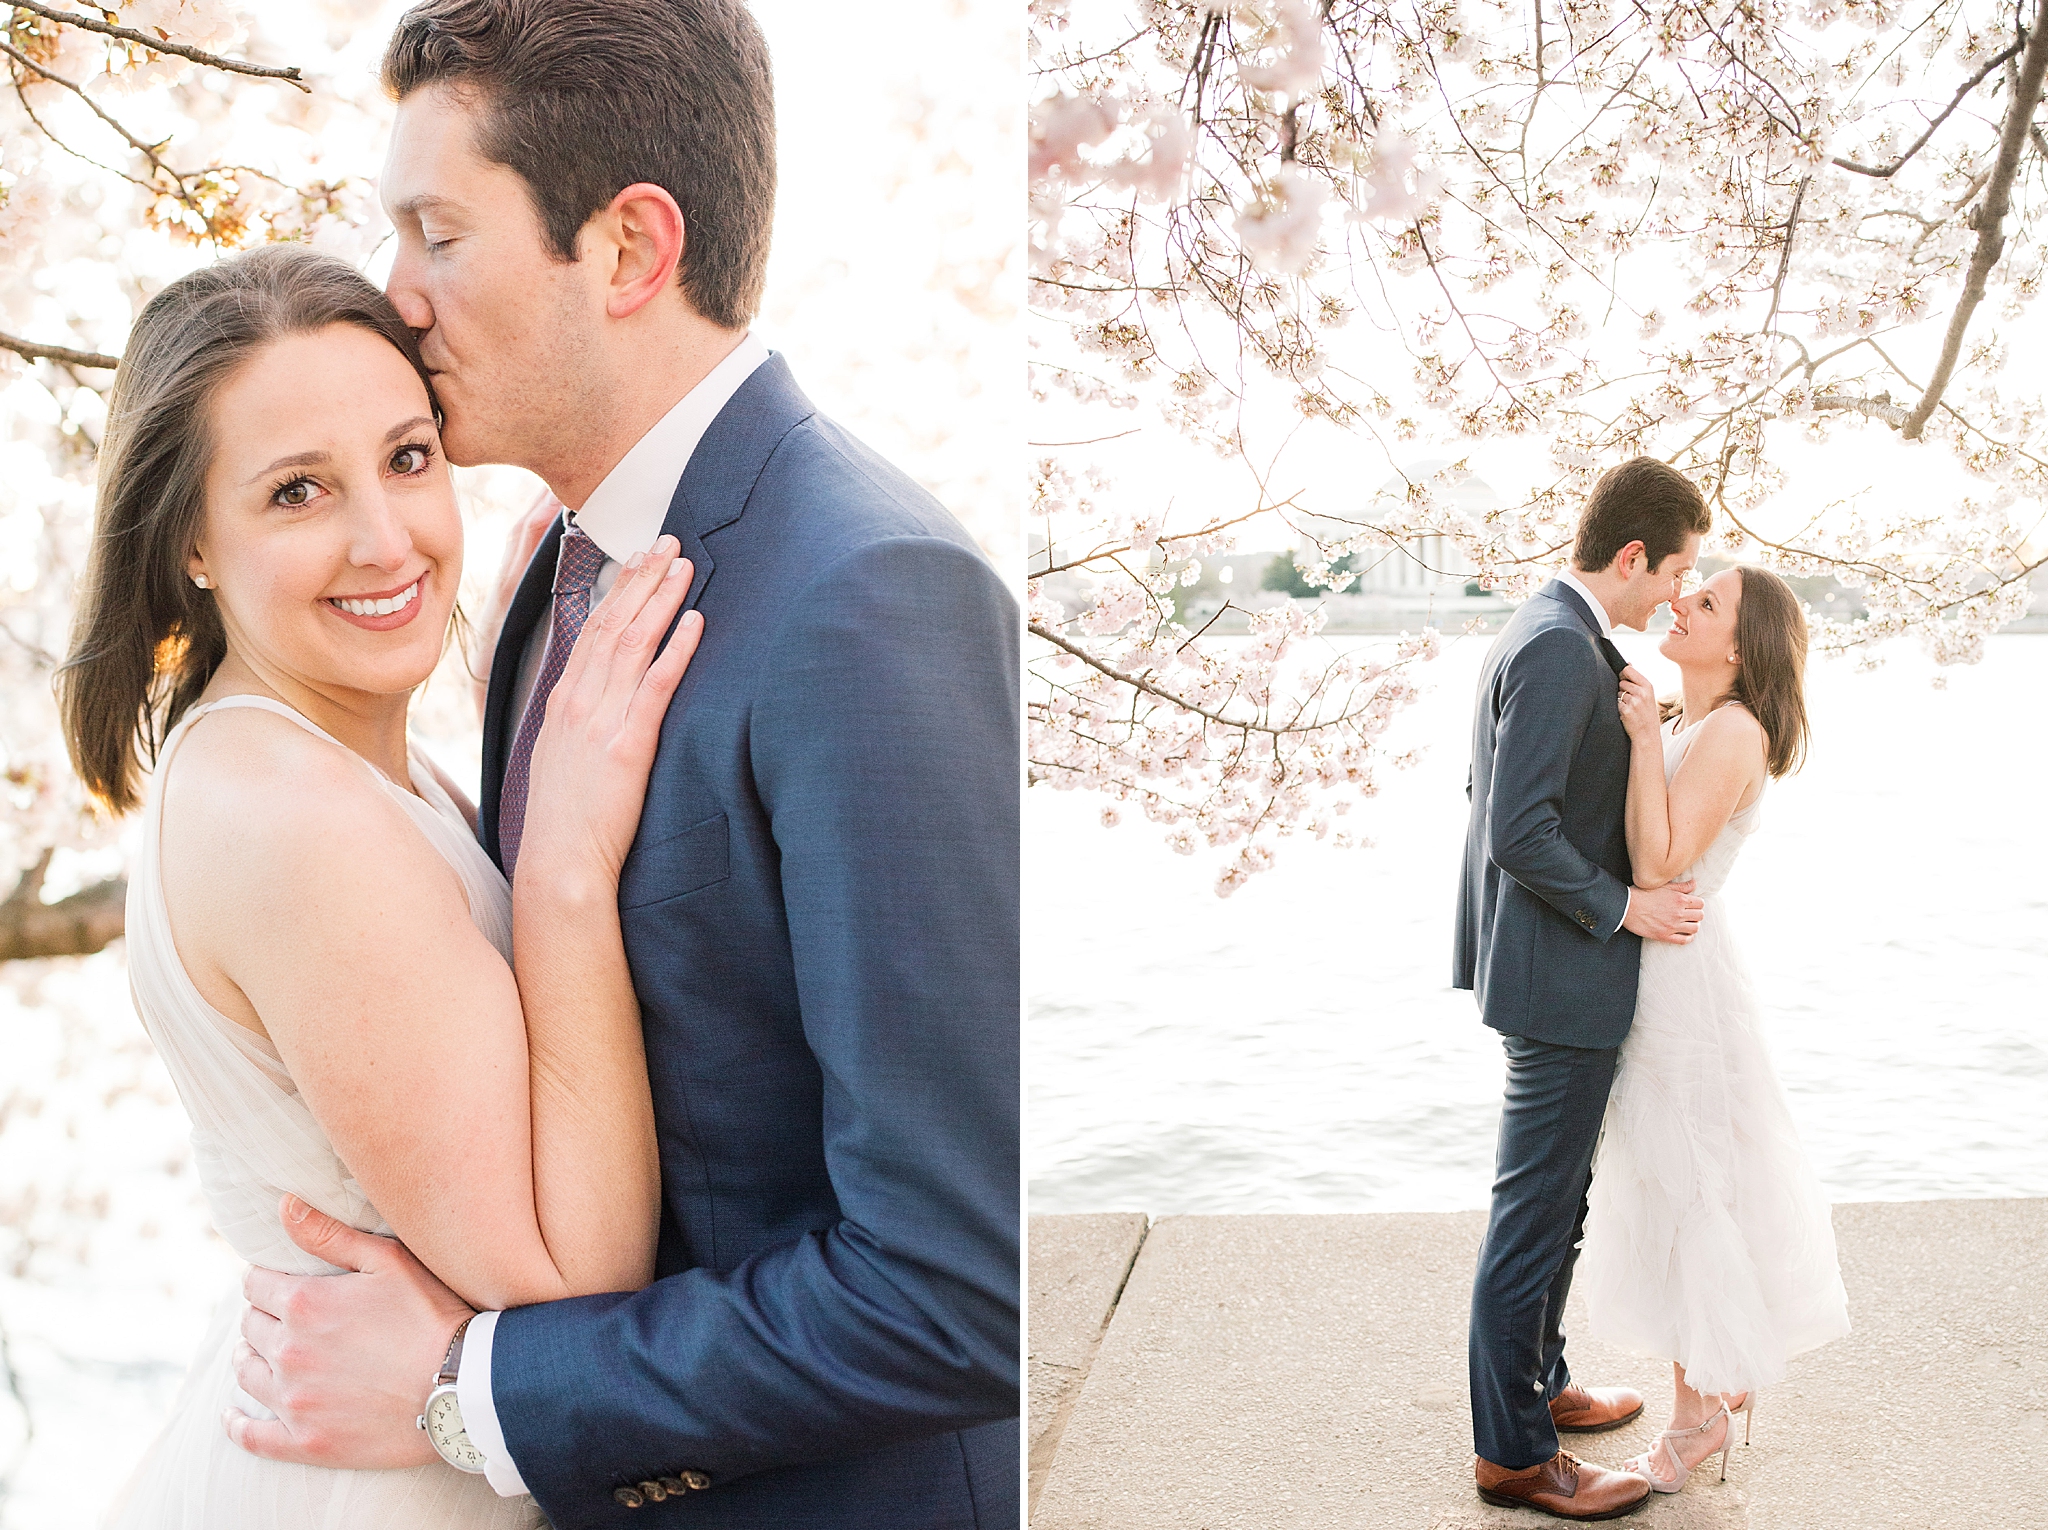 A stylish cherry blossom engagement session at the Tidal Basin in Washington, DC during peak bloom.